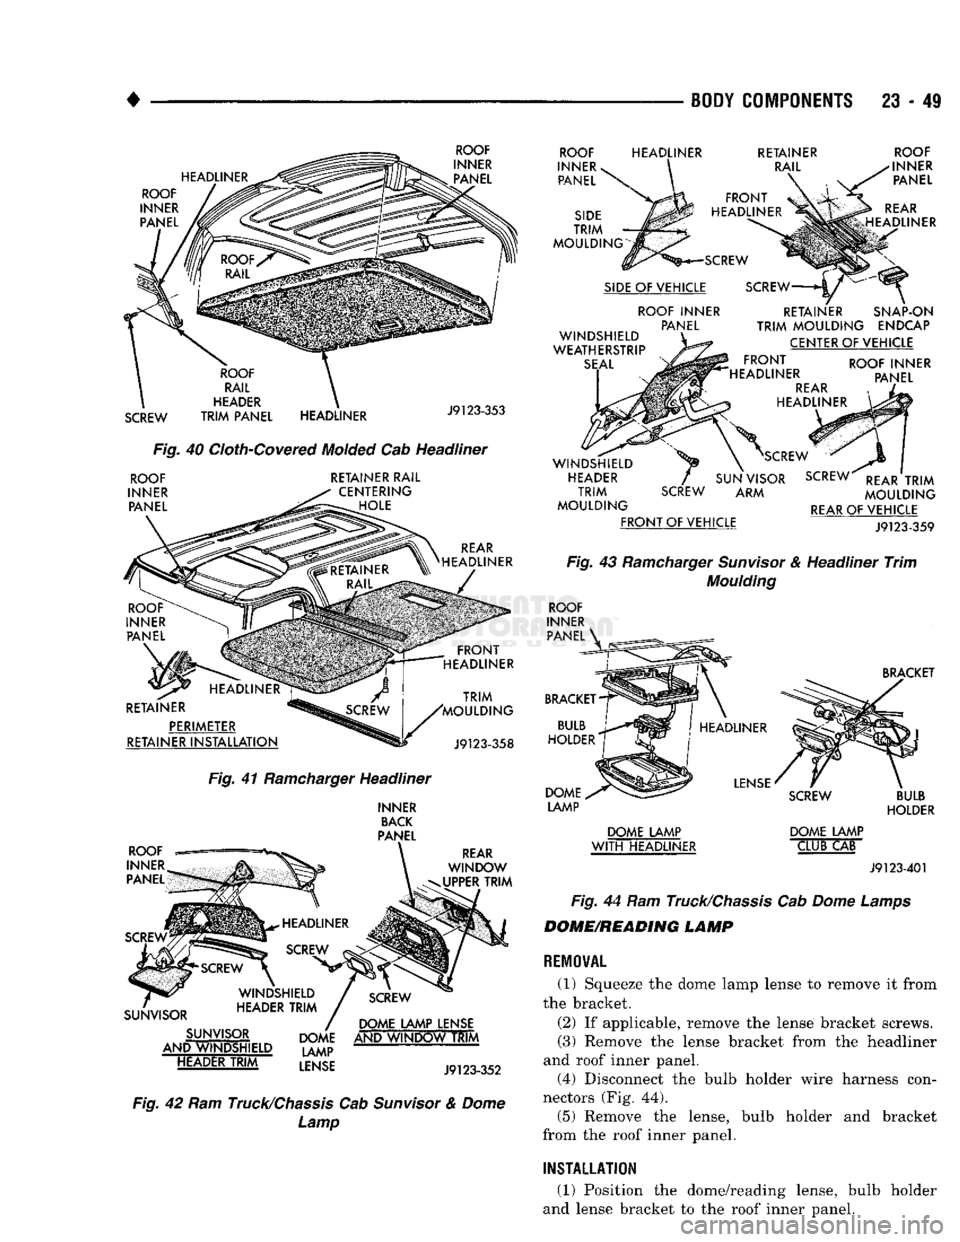 DODGE TRUCK 1993  Service Repair Manual 
•
 ^ ^ —
 BODY COMPONENTS
 23 - 49 

HEADLINER  ROOF 
INNER  PANEL 
ROOF 
INNER  PANEL 

SCREW 
 ROOF 
RAIL 
HEADER 

TRIM
 PANEL  HEADLINER 

J9123-353 

Fig.
 40
 Cloth-Covered
 Molded
 Cab Hea